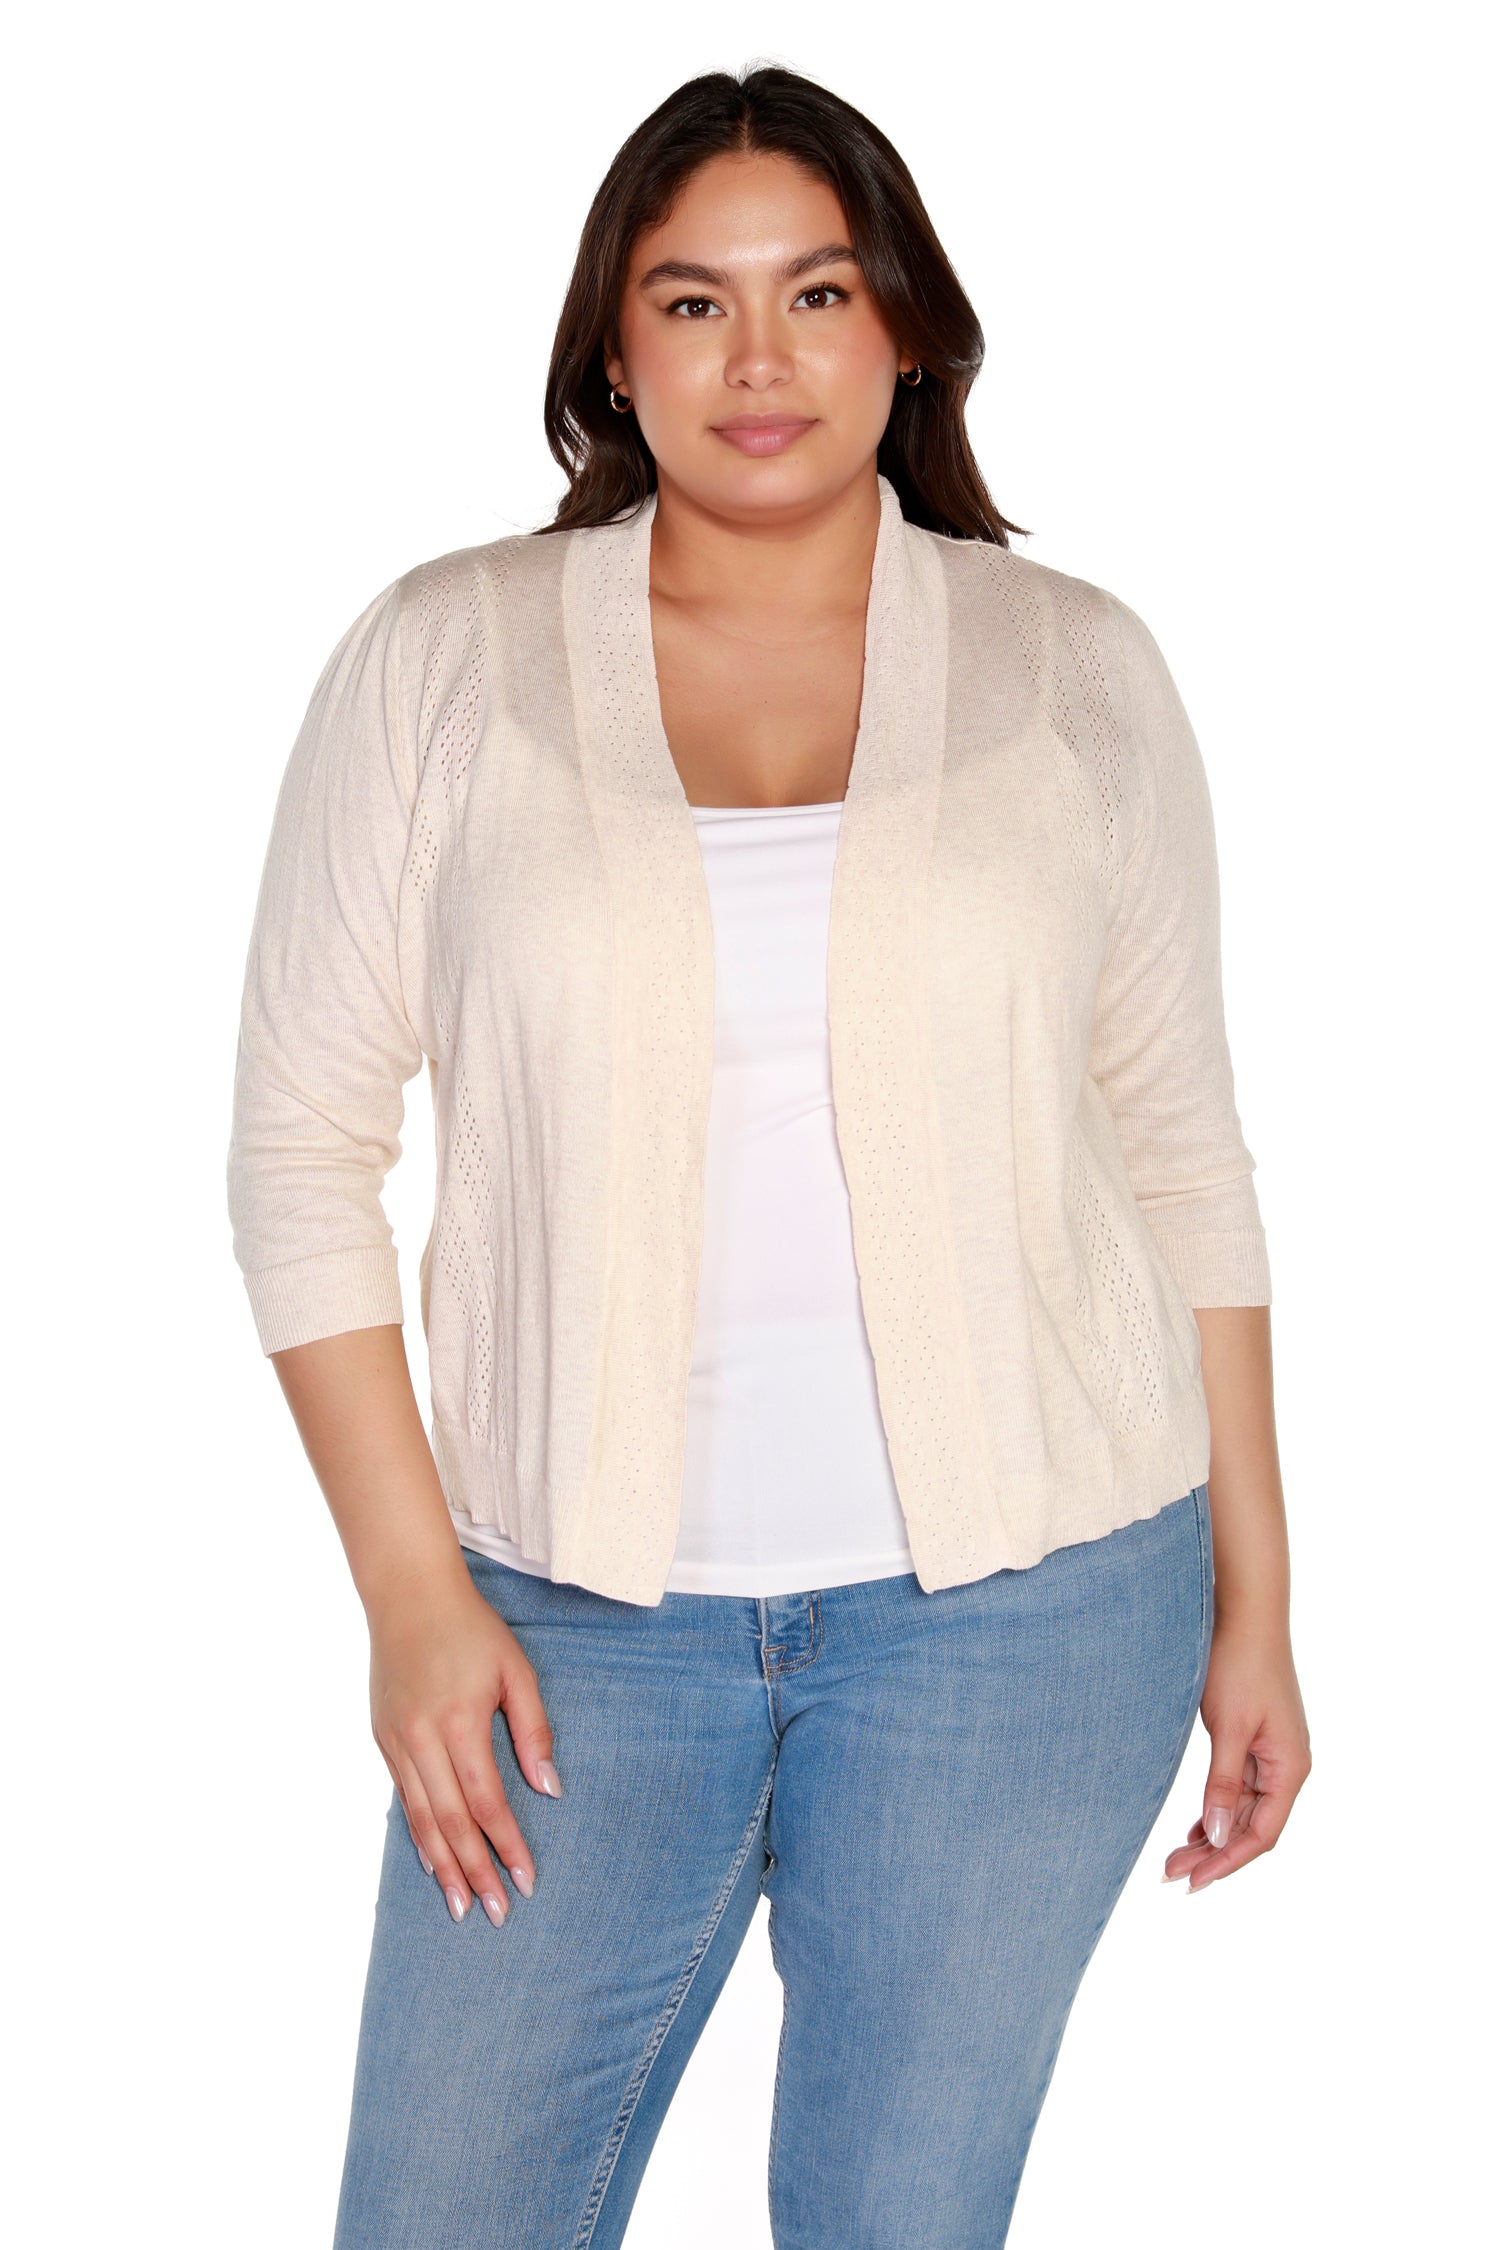 Women’s Light Cropped Cardigan Pointelle Sweater with 3/4 Sleeves | Curvy